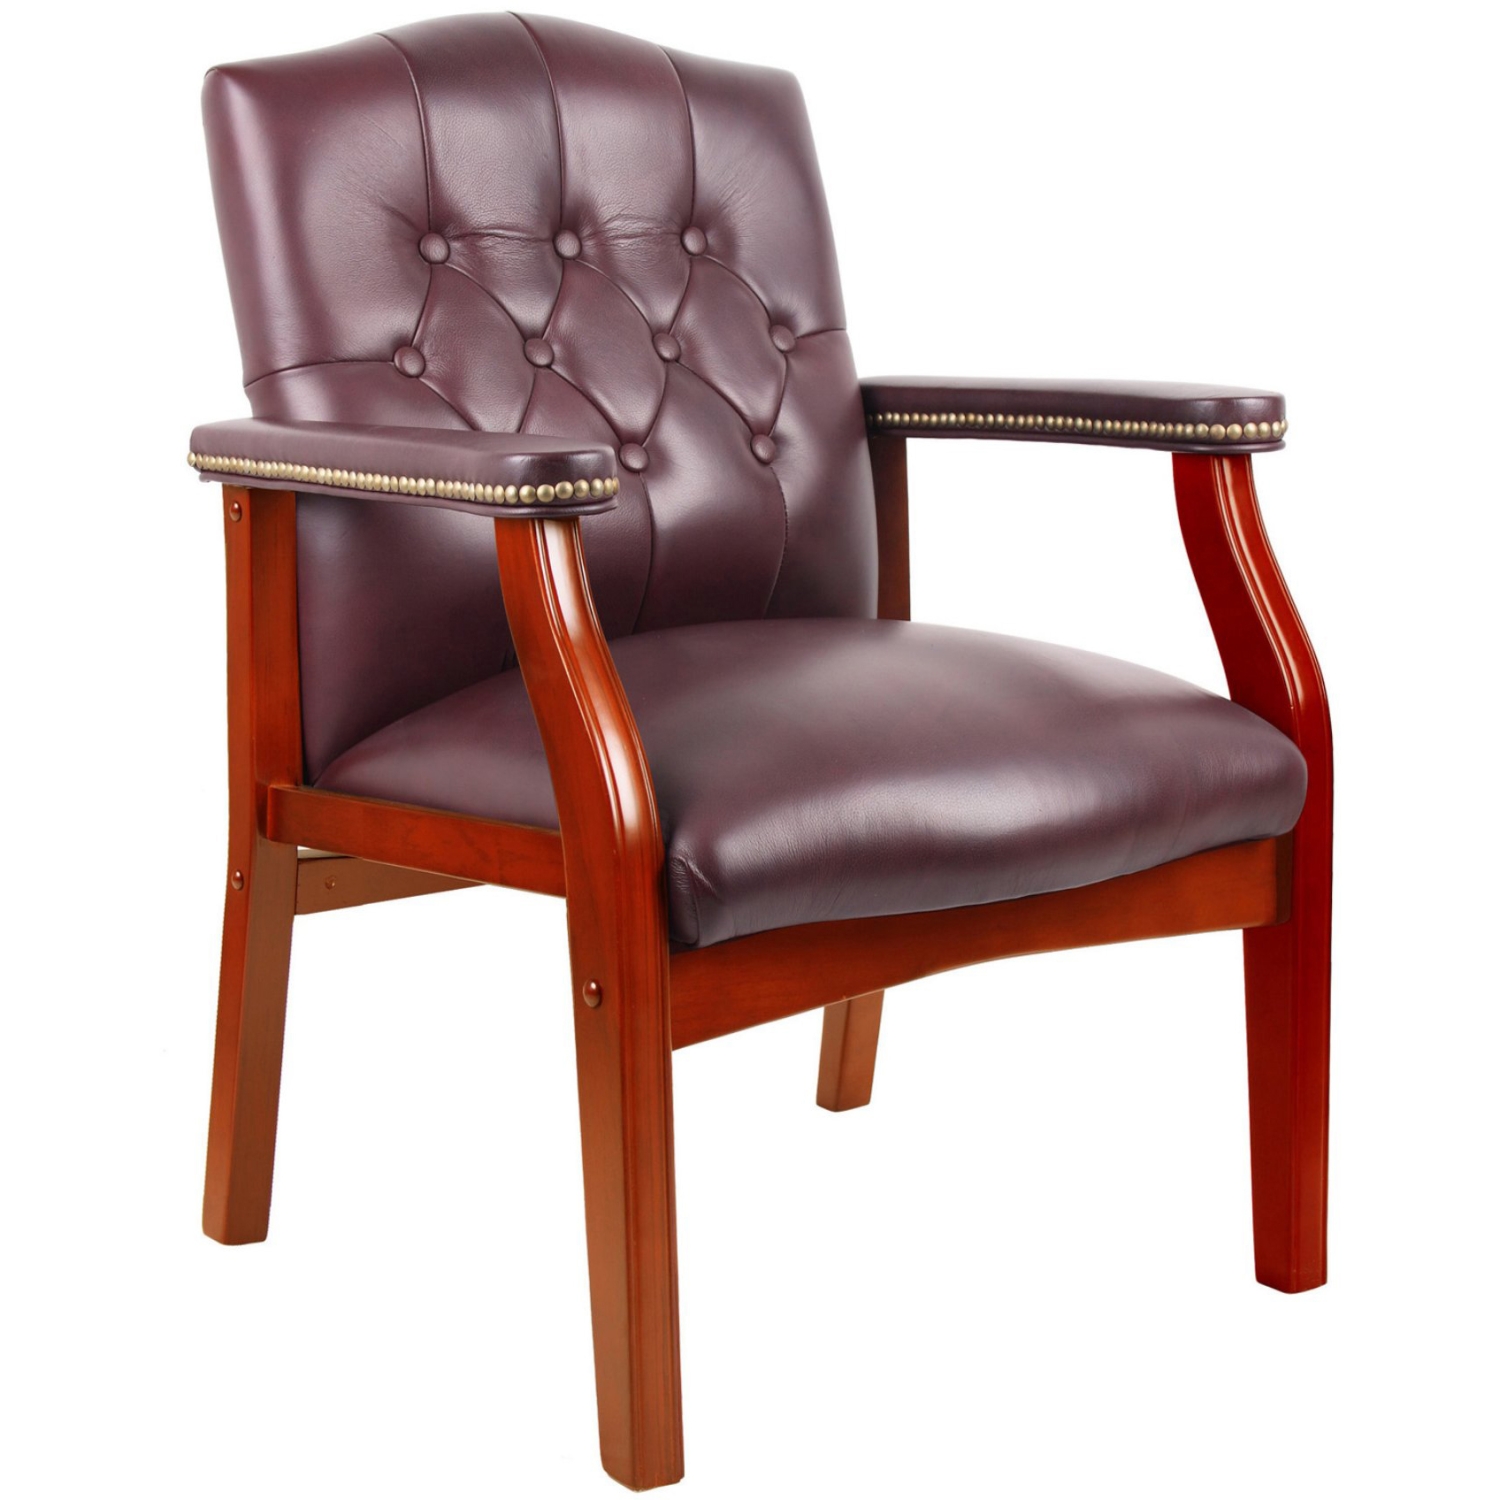 Office Chair In Burgundy Leather with Tufted Back in Cherry - image 3 of 3